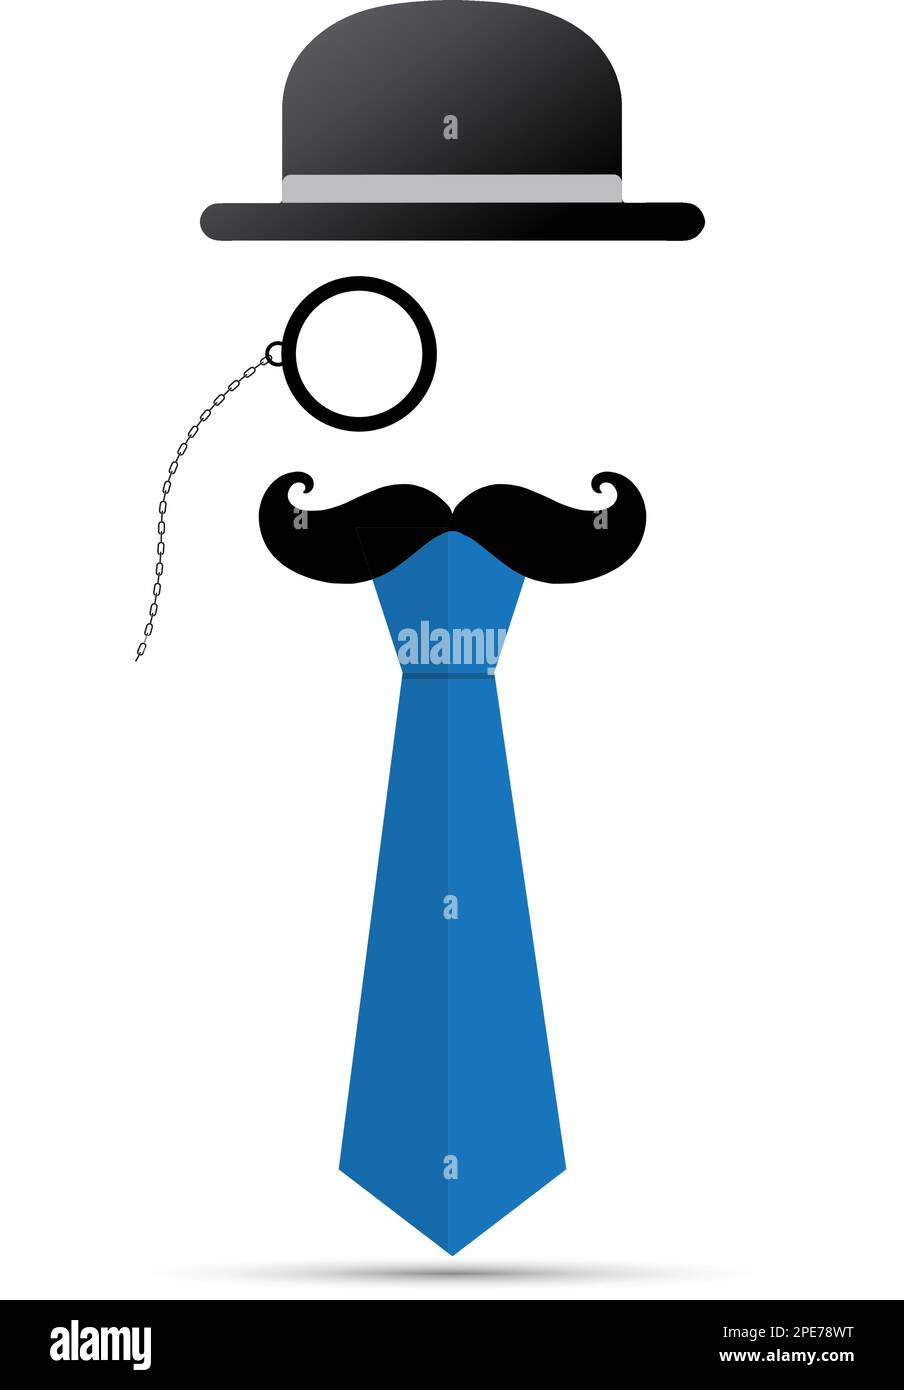 Black mustache, monocle, hat and blue tie on white background Stock Vector